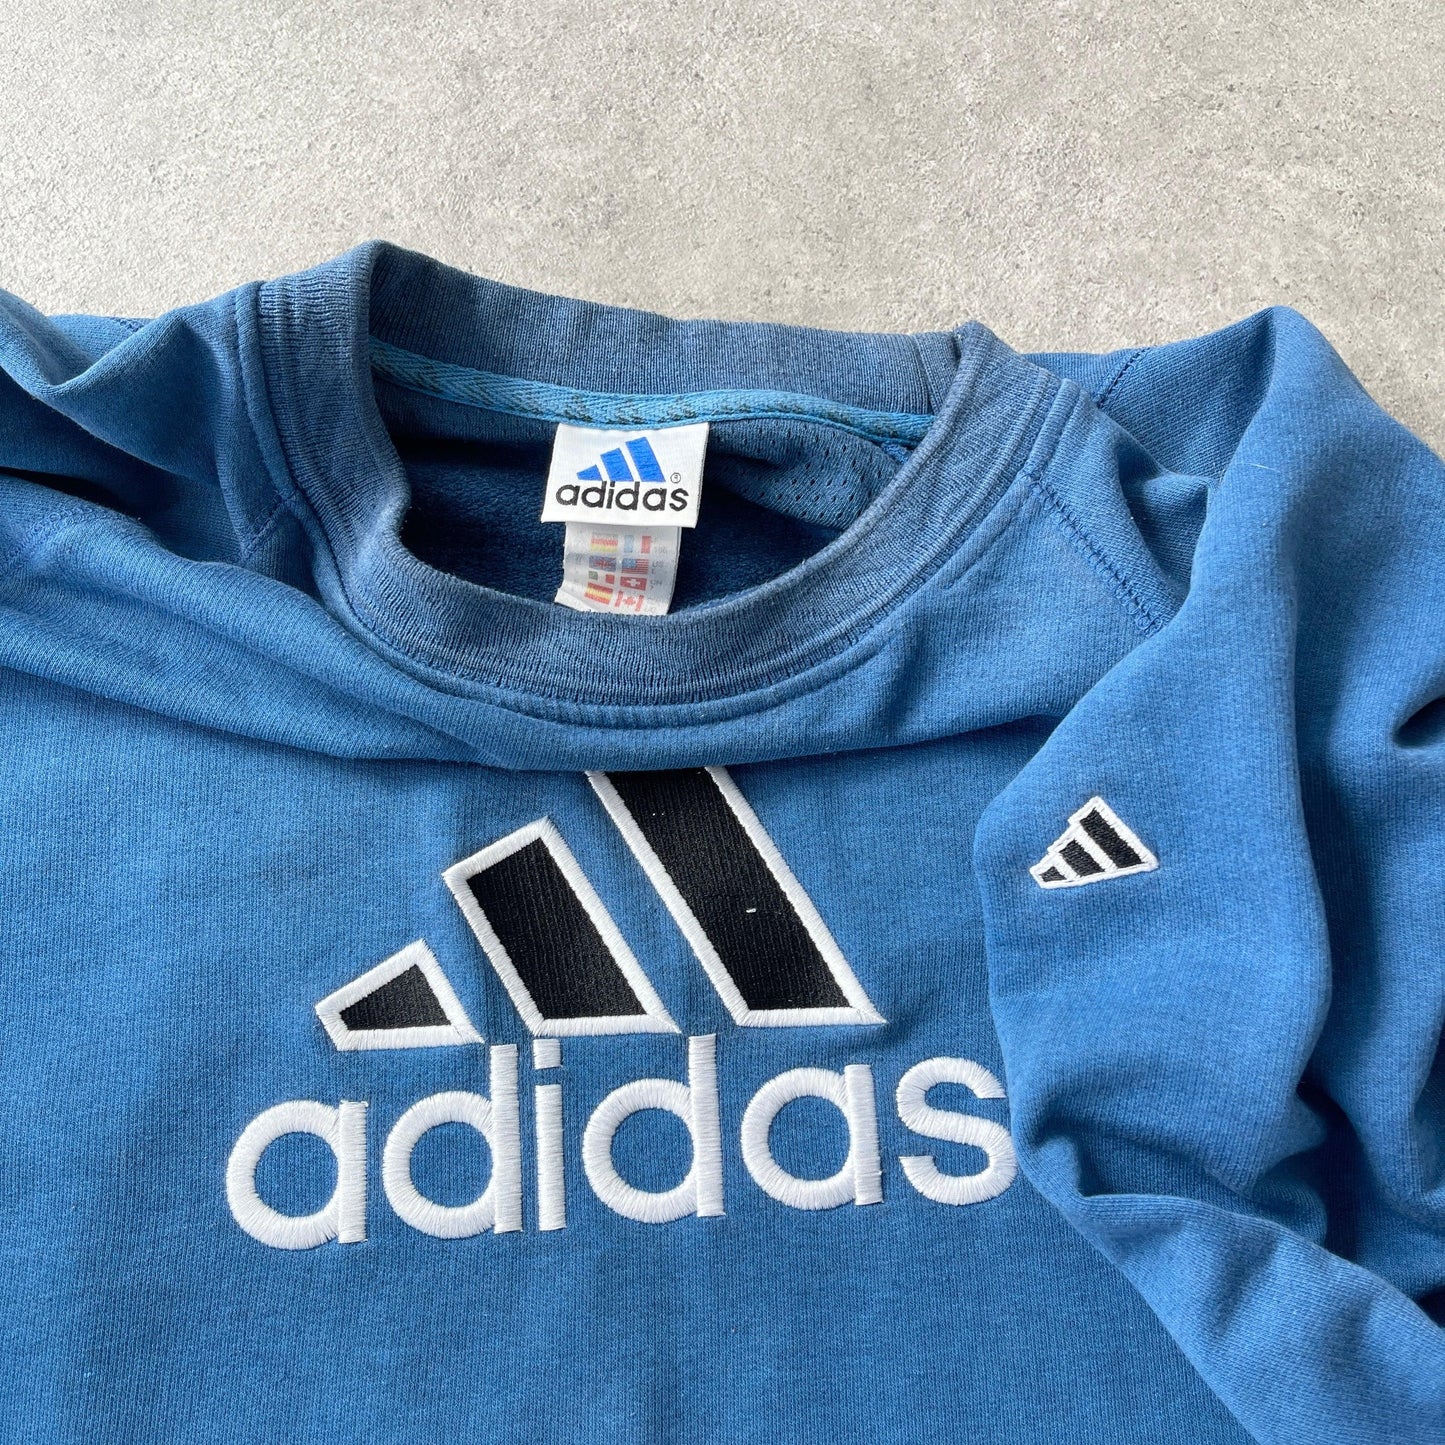 Adidas 1990s heavyweight embroidered sweatshirt (L) - Known Source